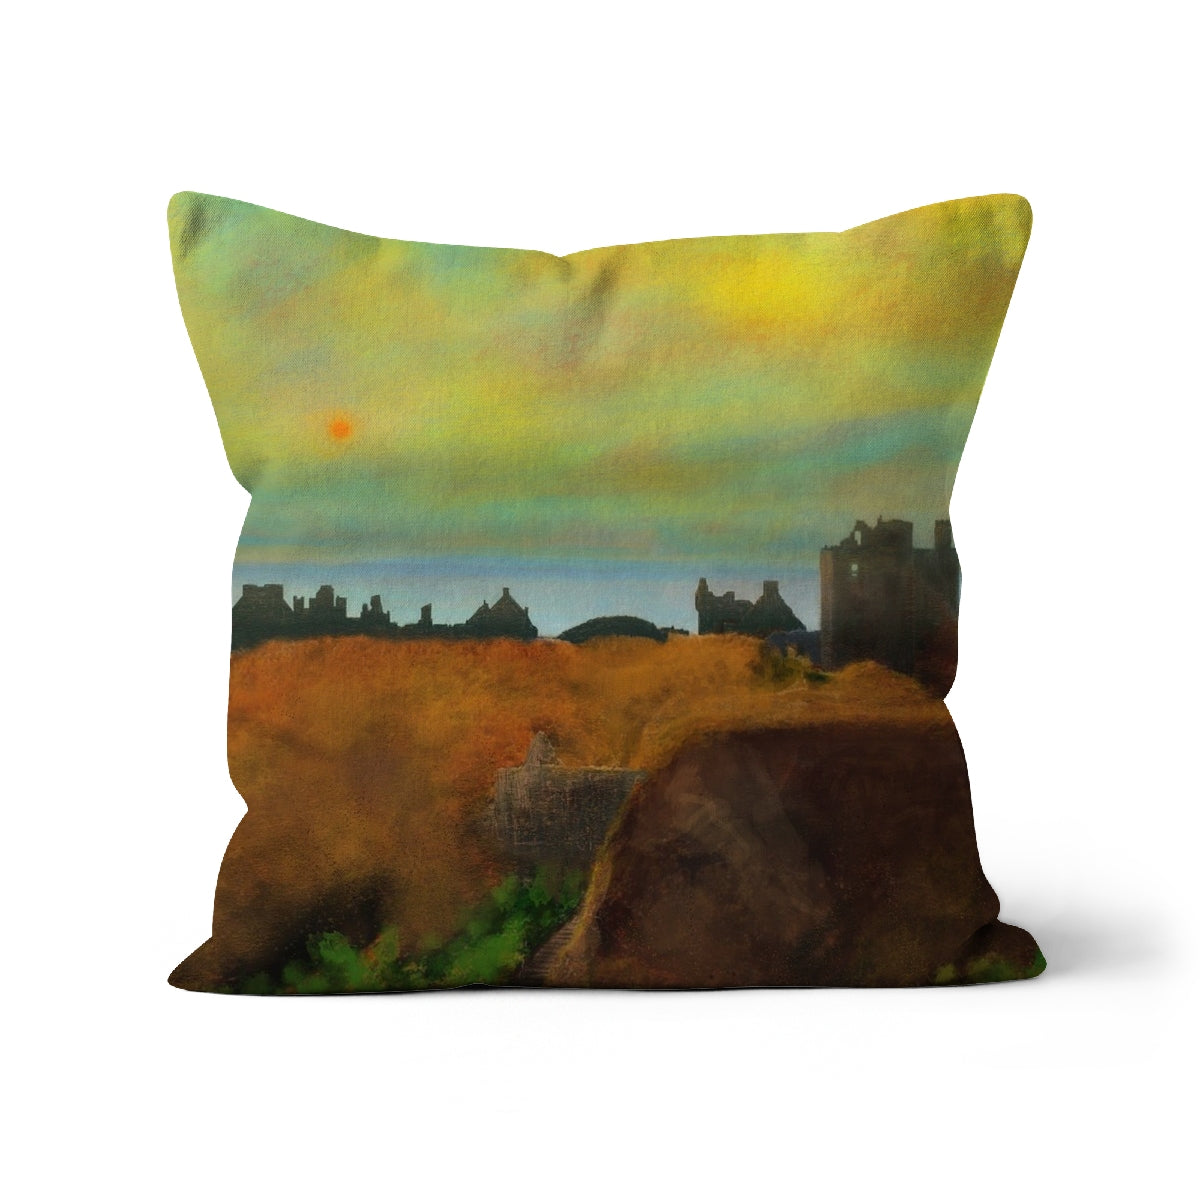 Dunnottar Castle Art Gifts Cushion-Cushions-Historic & Iconic Scotland Art Gallery-Canvas-16"x16"-Paintings, Prints, Homeware, Art Gifts From Scotland By Scottish Artist Kevin Hunter